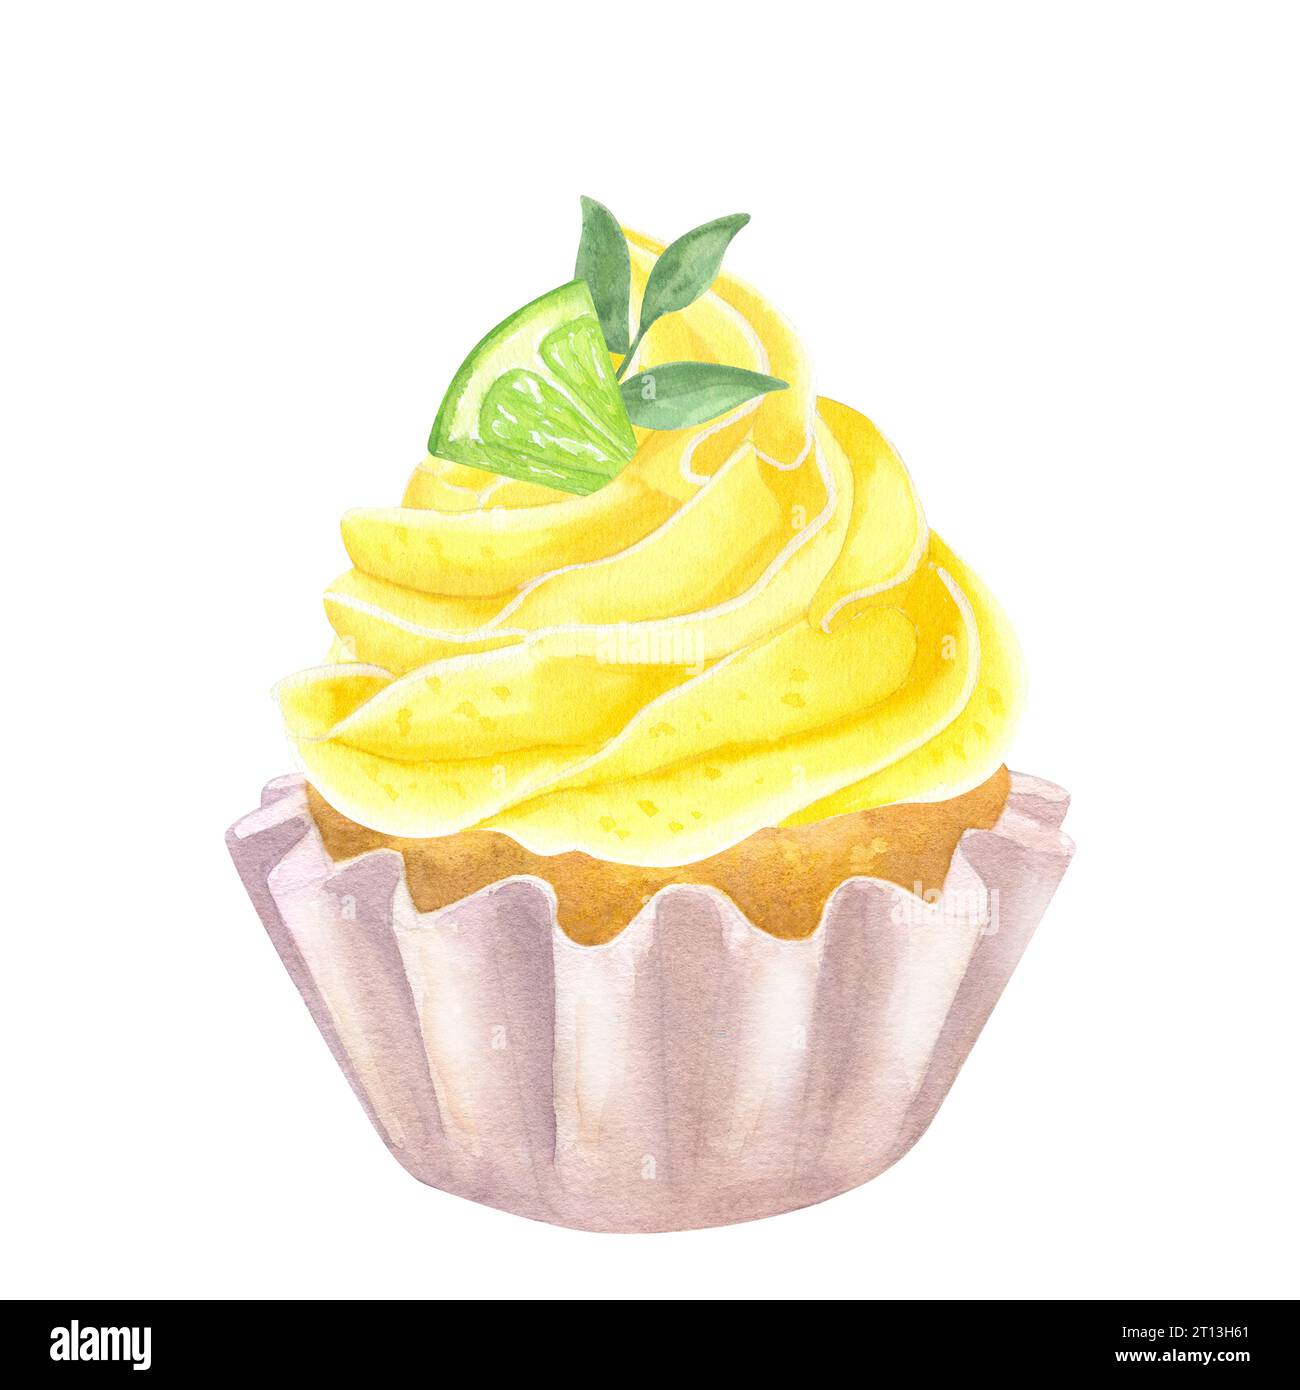 Watercolor cupcake with yellow whipped cream. Decorated with lime, green leaves. Food clipart. Hand drawn illustration isolated on white background Stock Photo